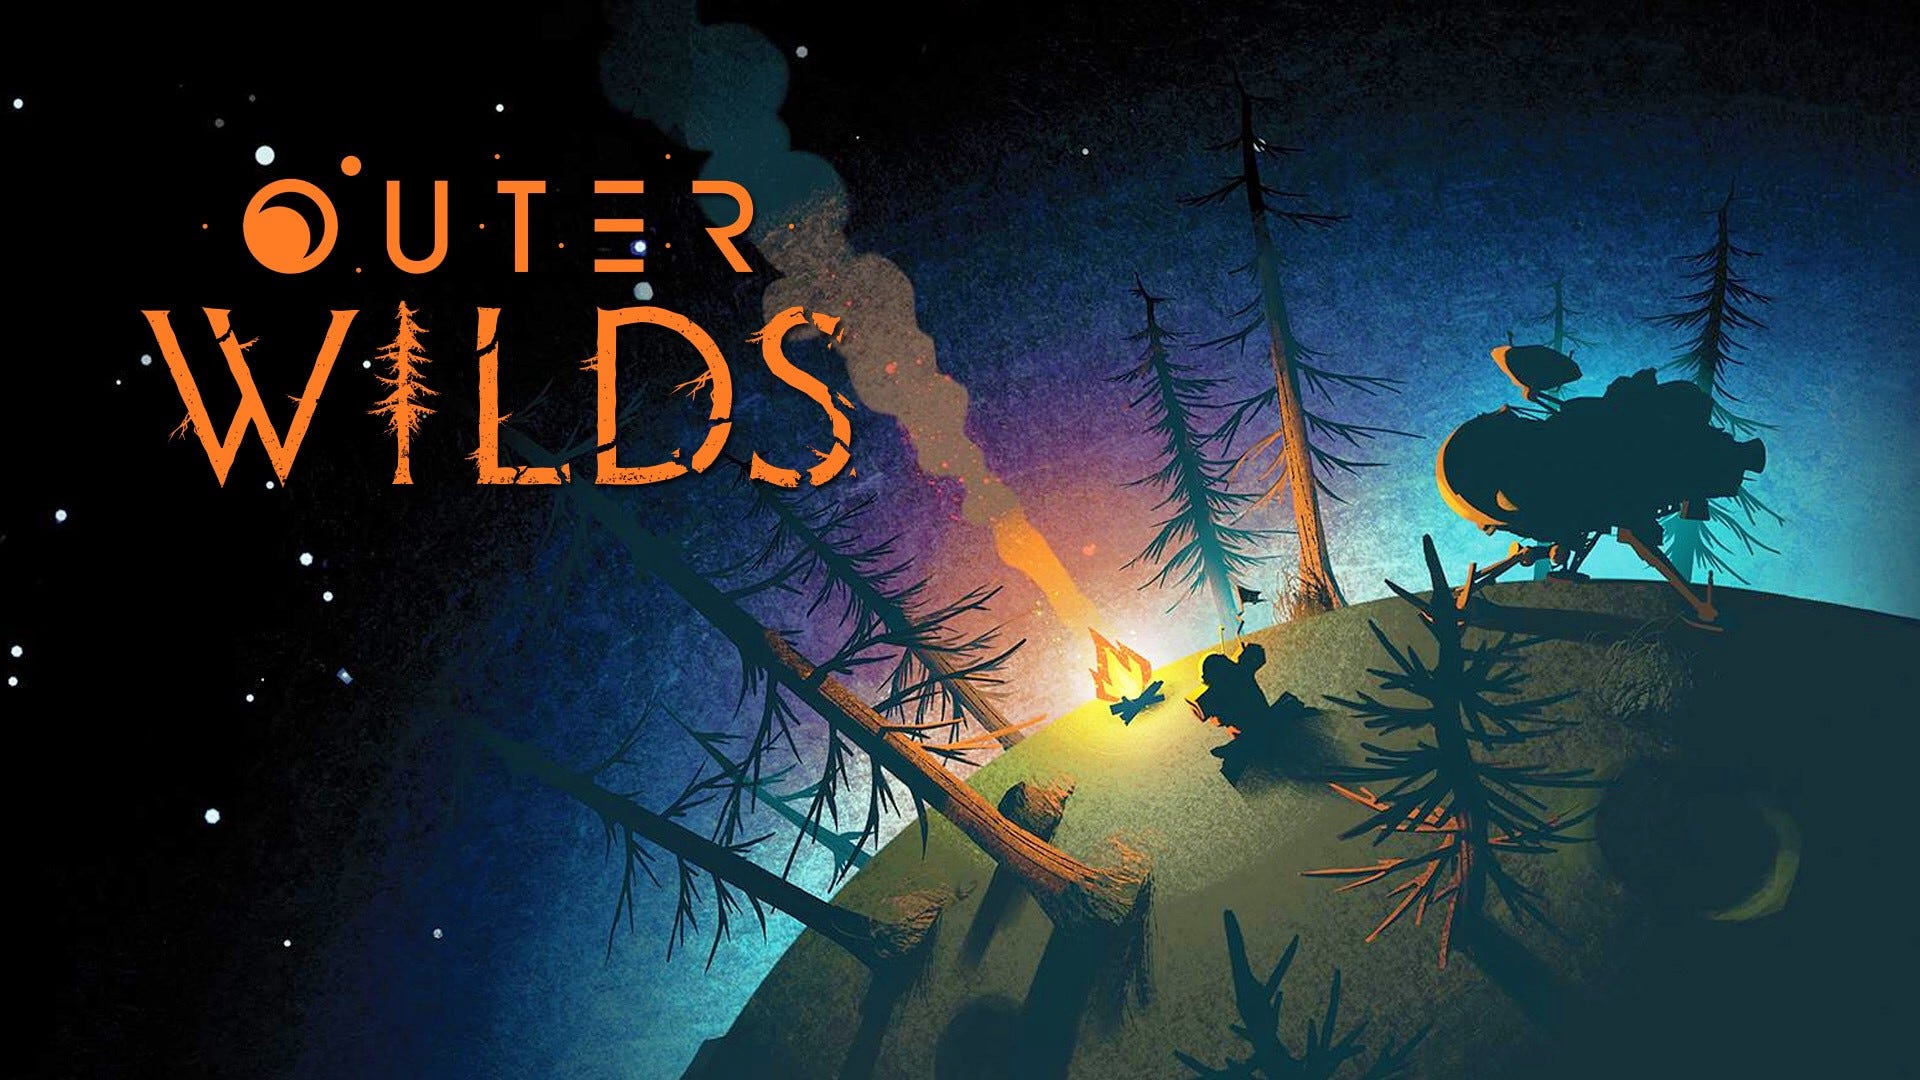 Xbox Outer Wilds achievements. Find your Xbox achievements on